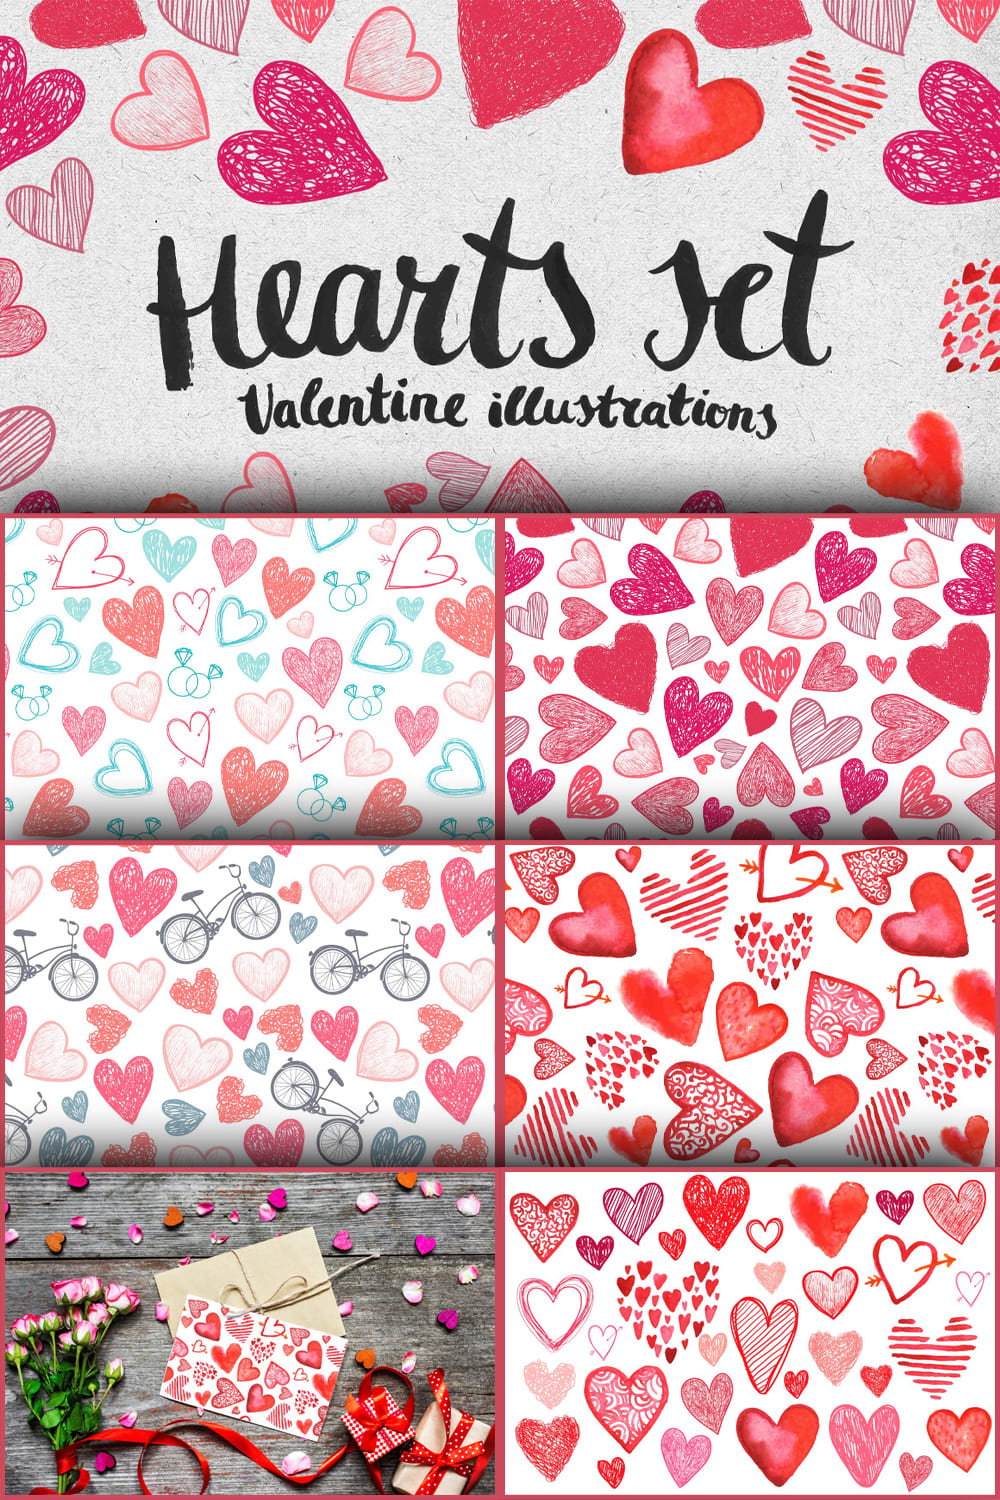 Hearts and romantic patterns - pinterest image preview.